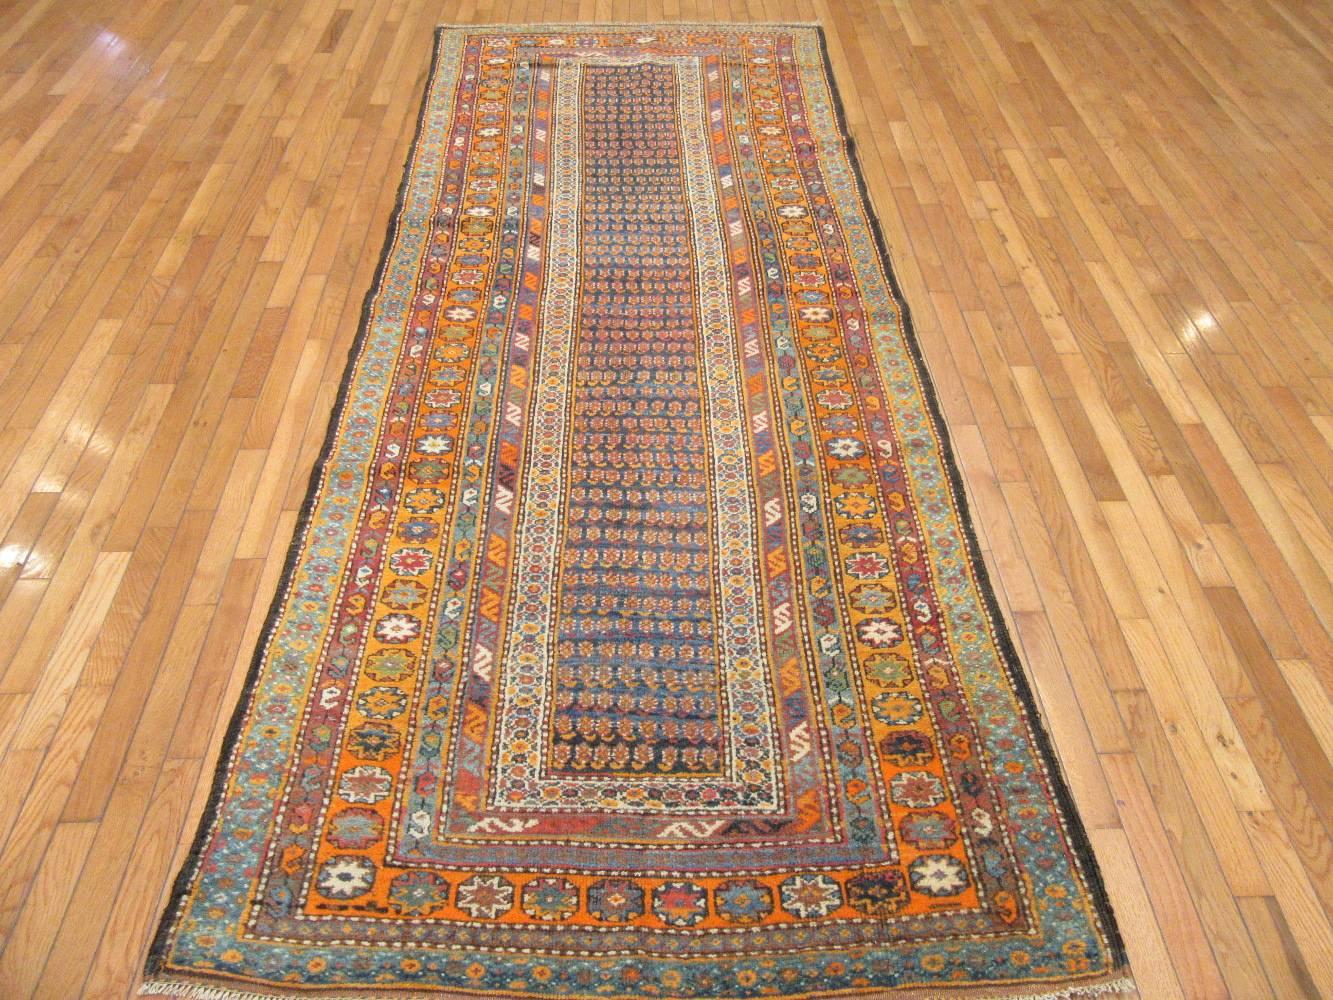 This is an antique hand knotted rug from the Kurdish region of western Iran. This rug is made with all wool colored with natural dyes in around the turn of the century. It has a detailed repetitive paisley motifs on a dark blue color background